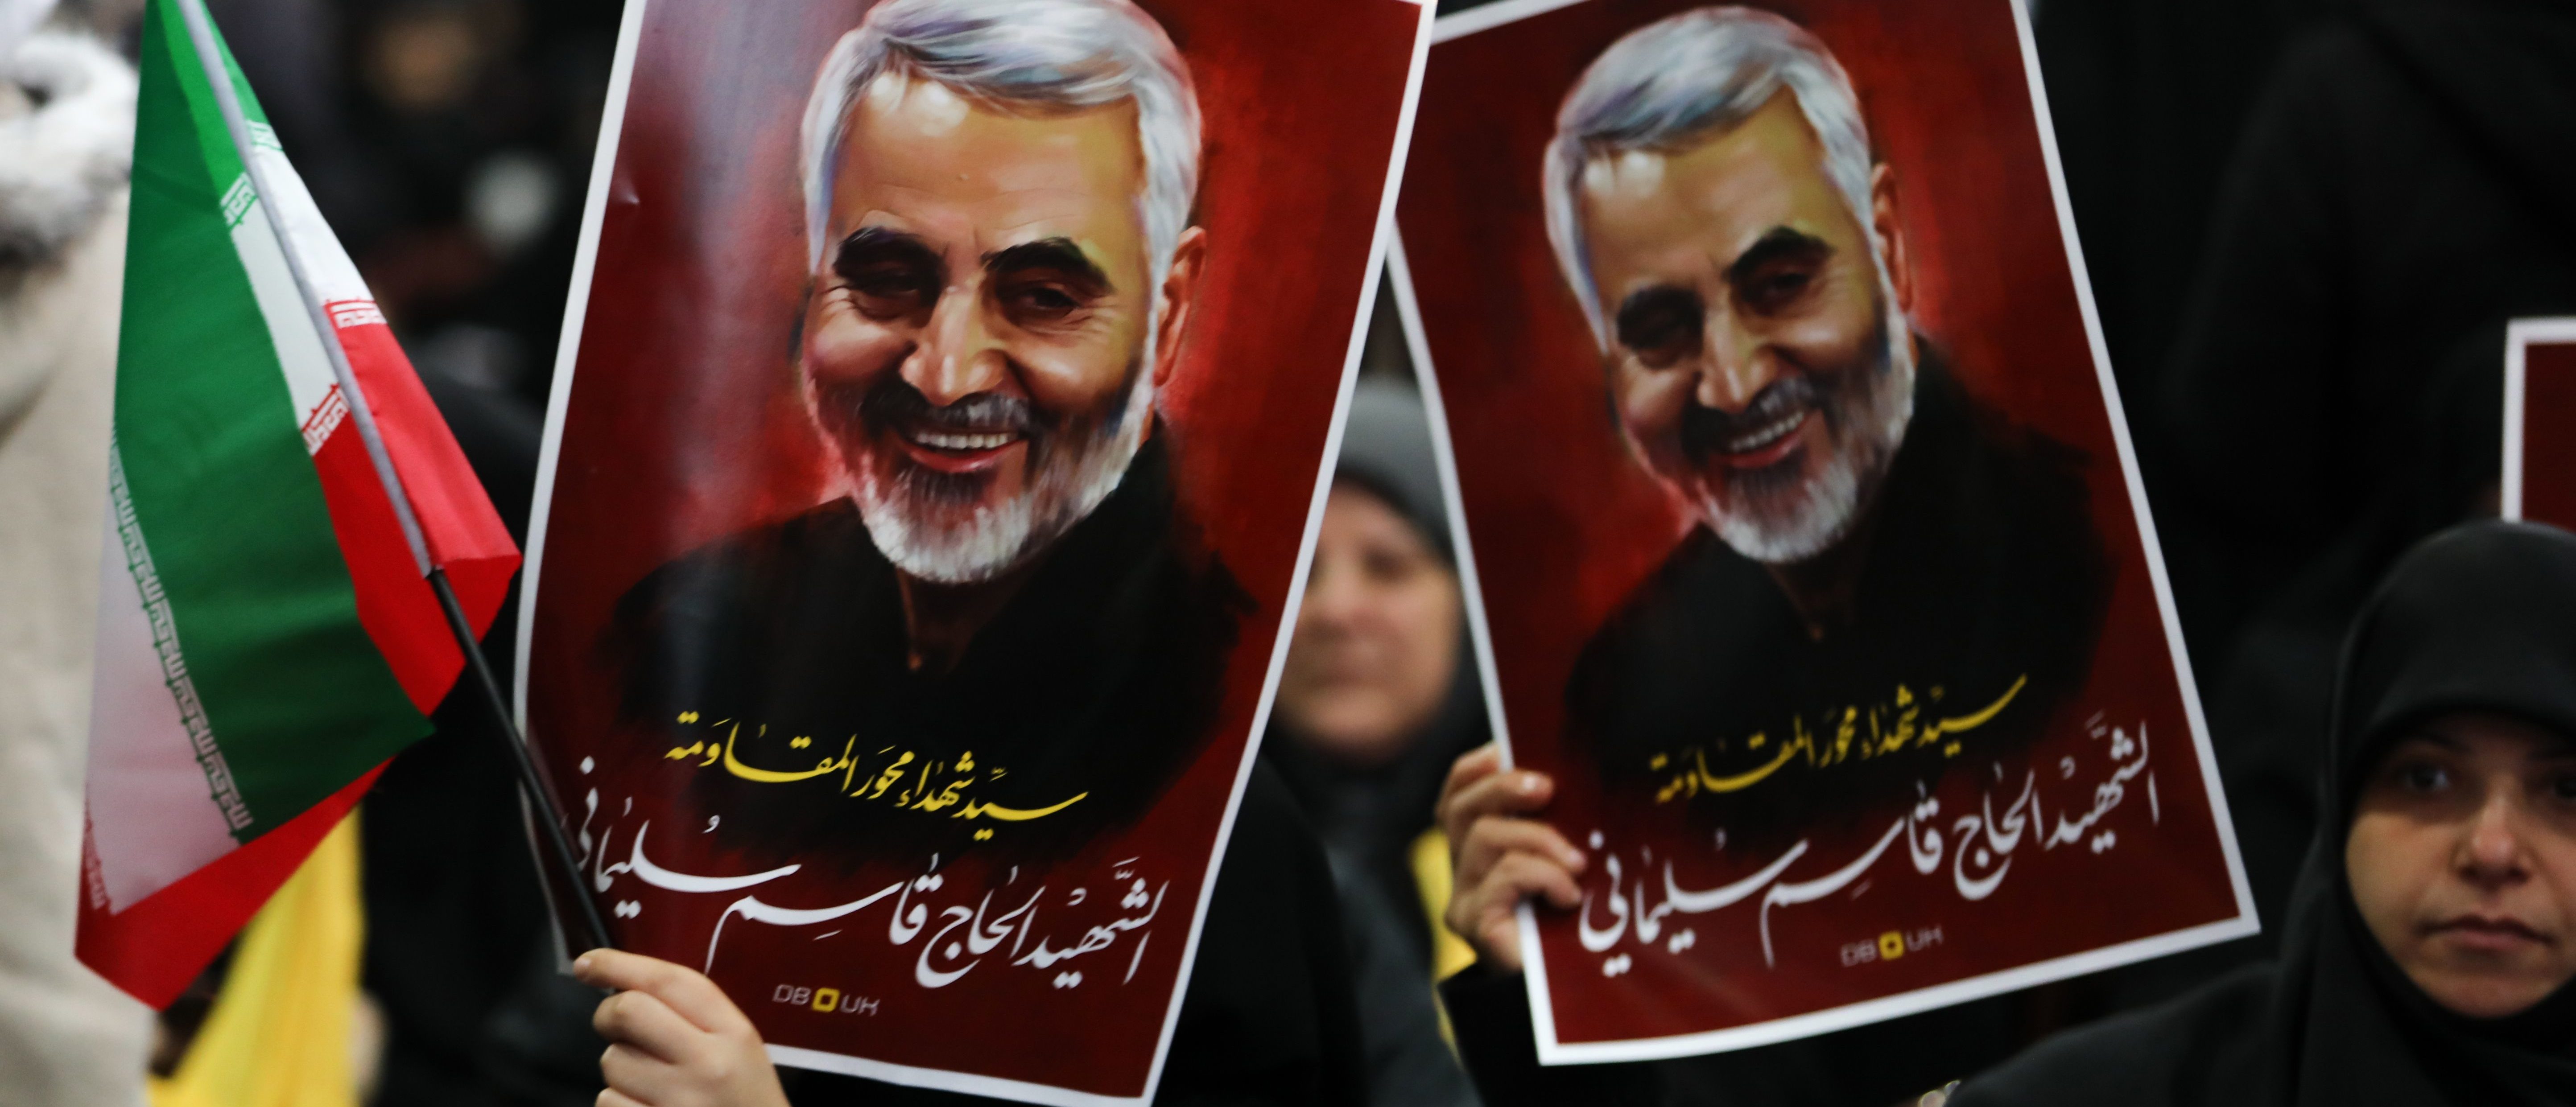 Iran Issues Warrant For Trump’s Arrest Following The Killing Of Top ...